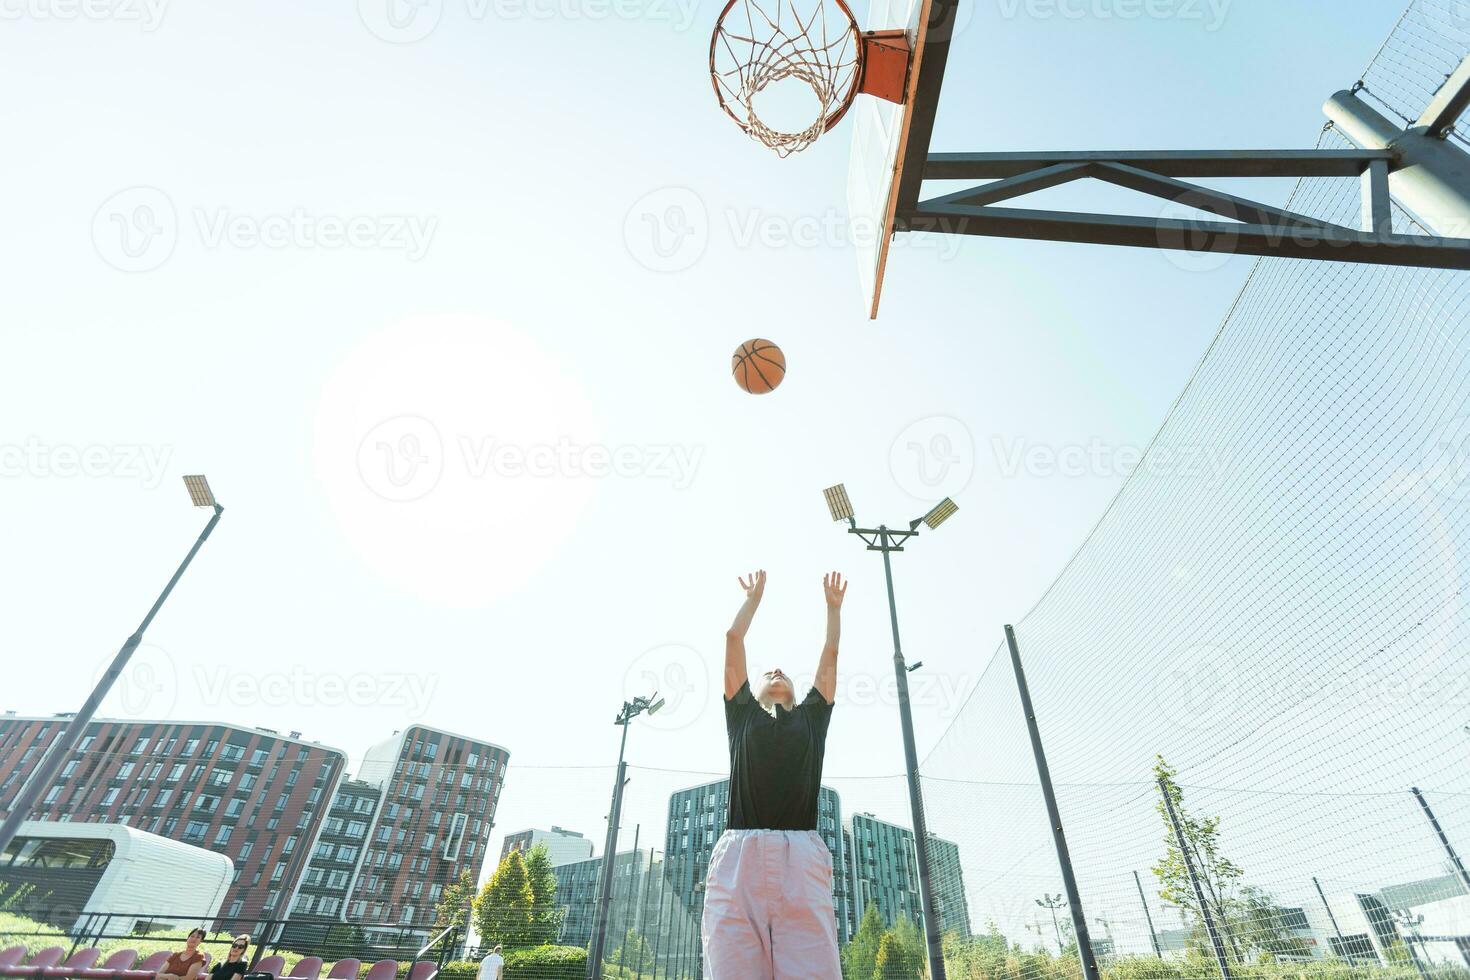 Concept of sports, hobbies and healthy lifestyle. Young athletic girl is training to play basketball on modern outdoor basketball court. Happy woman photo